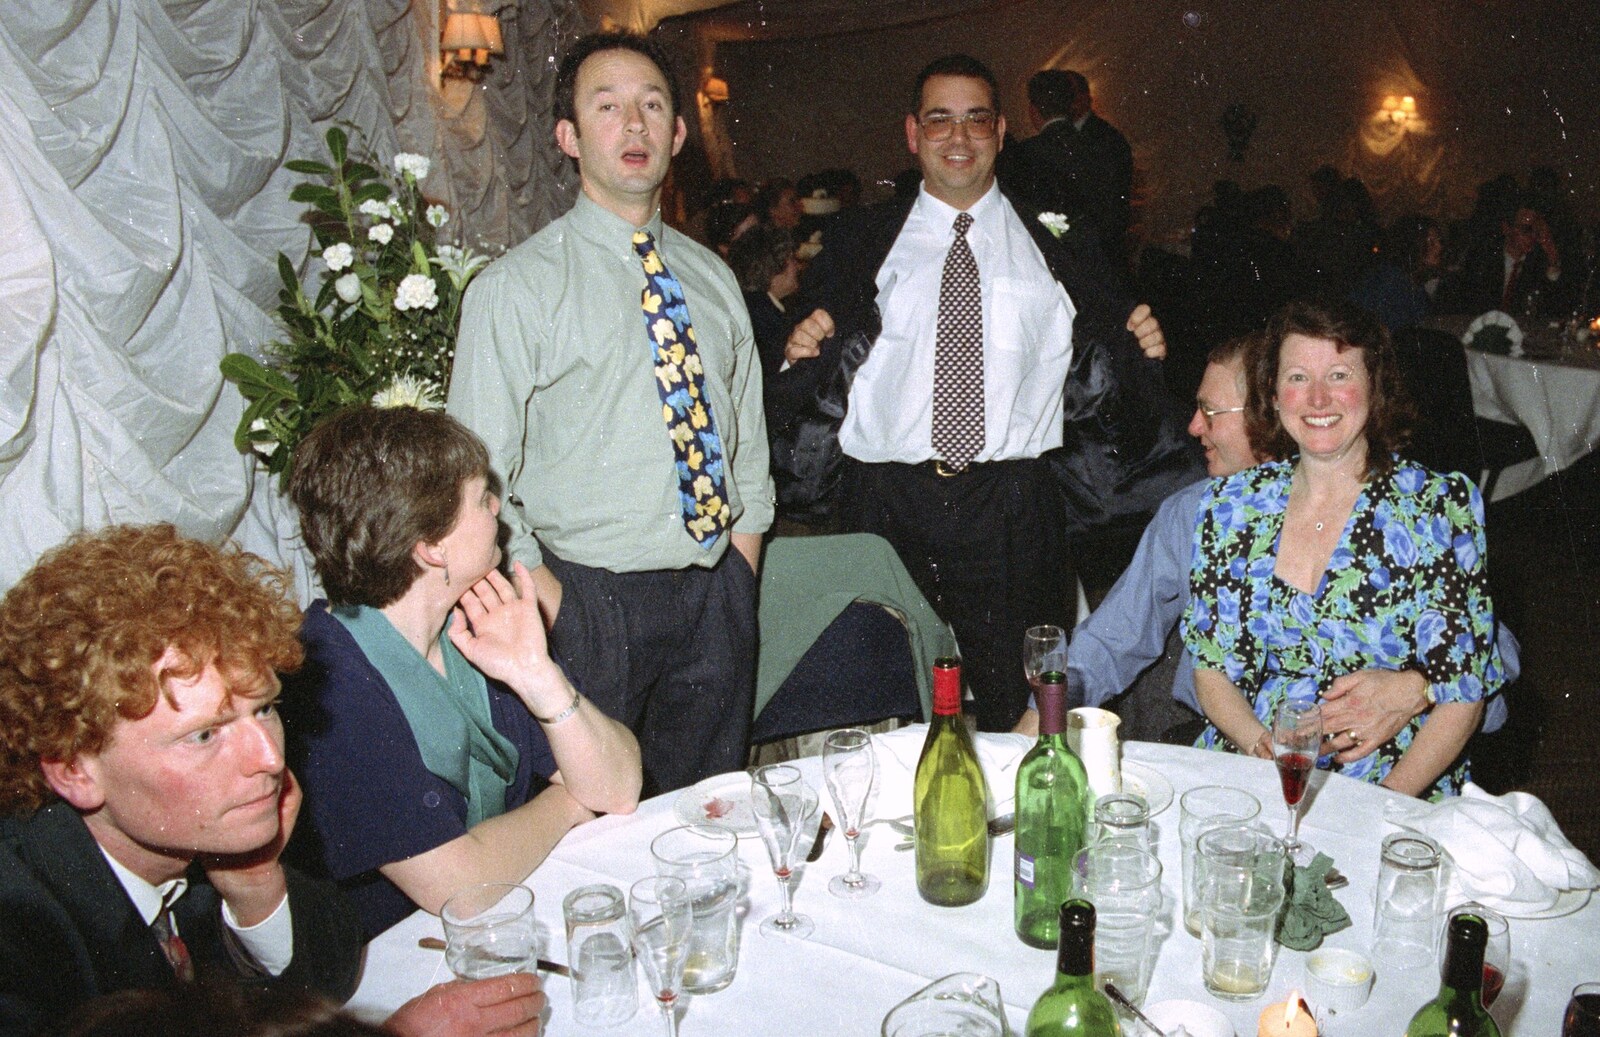 DH, Roger and the Pub Table from The Brome Swan at Graham and Pauline's Wedding, Gissing Hall, Norfolk - 28th April 1997